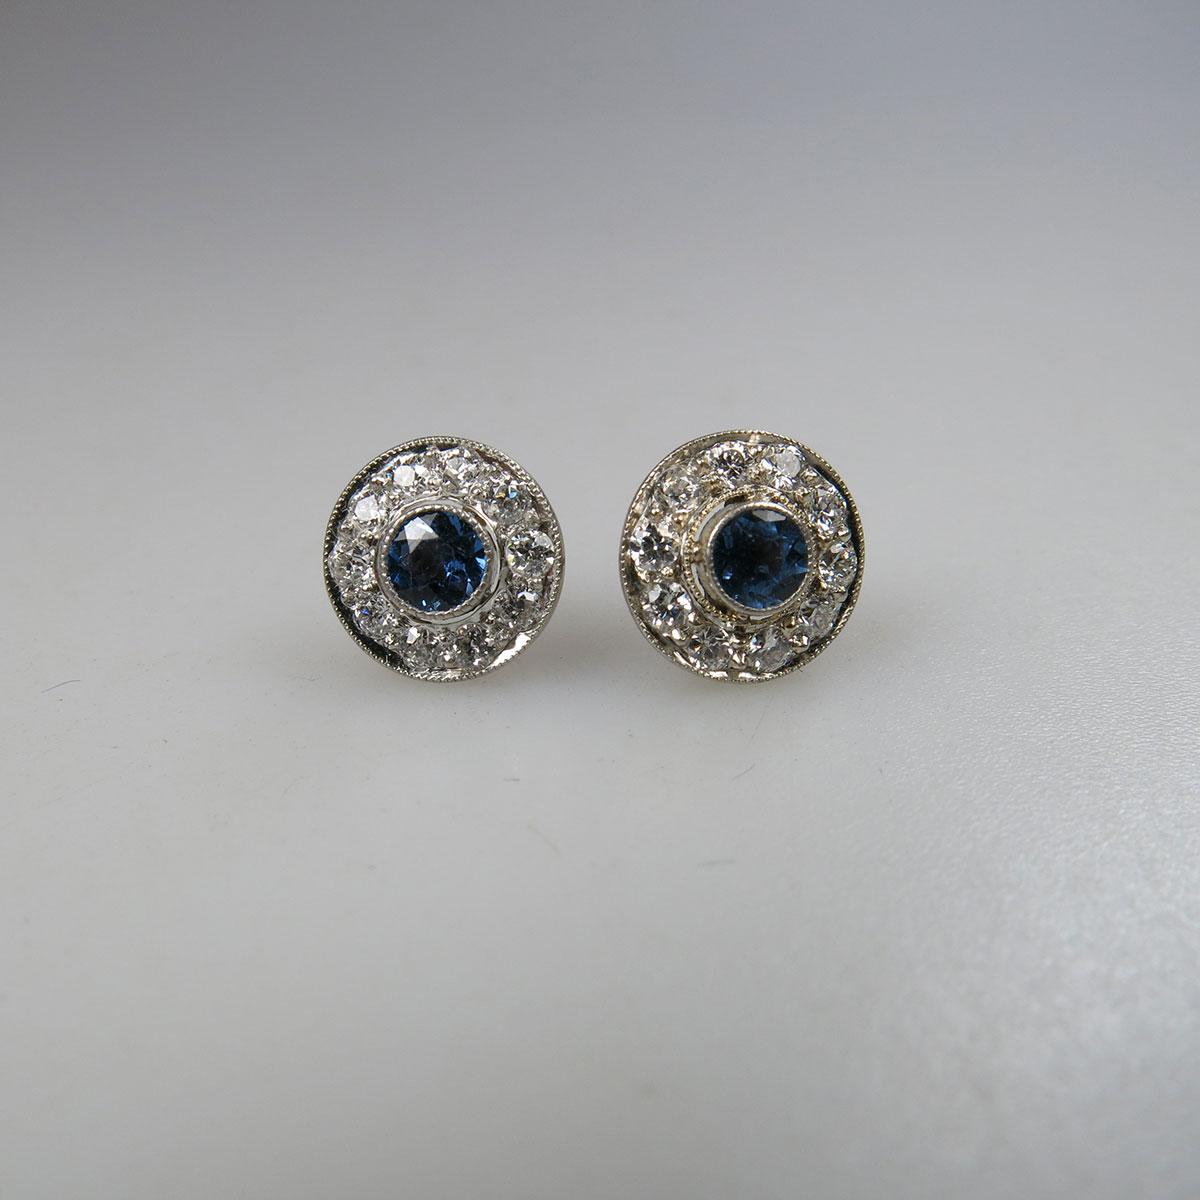 Pair Of 14k Yellow And White Gold Button Earrings